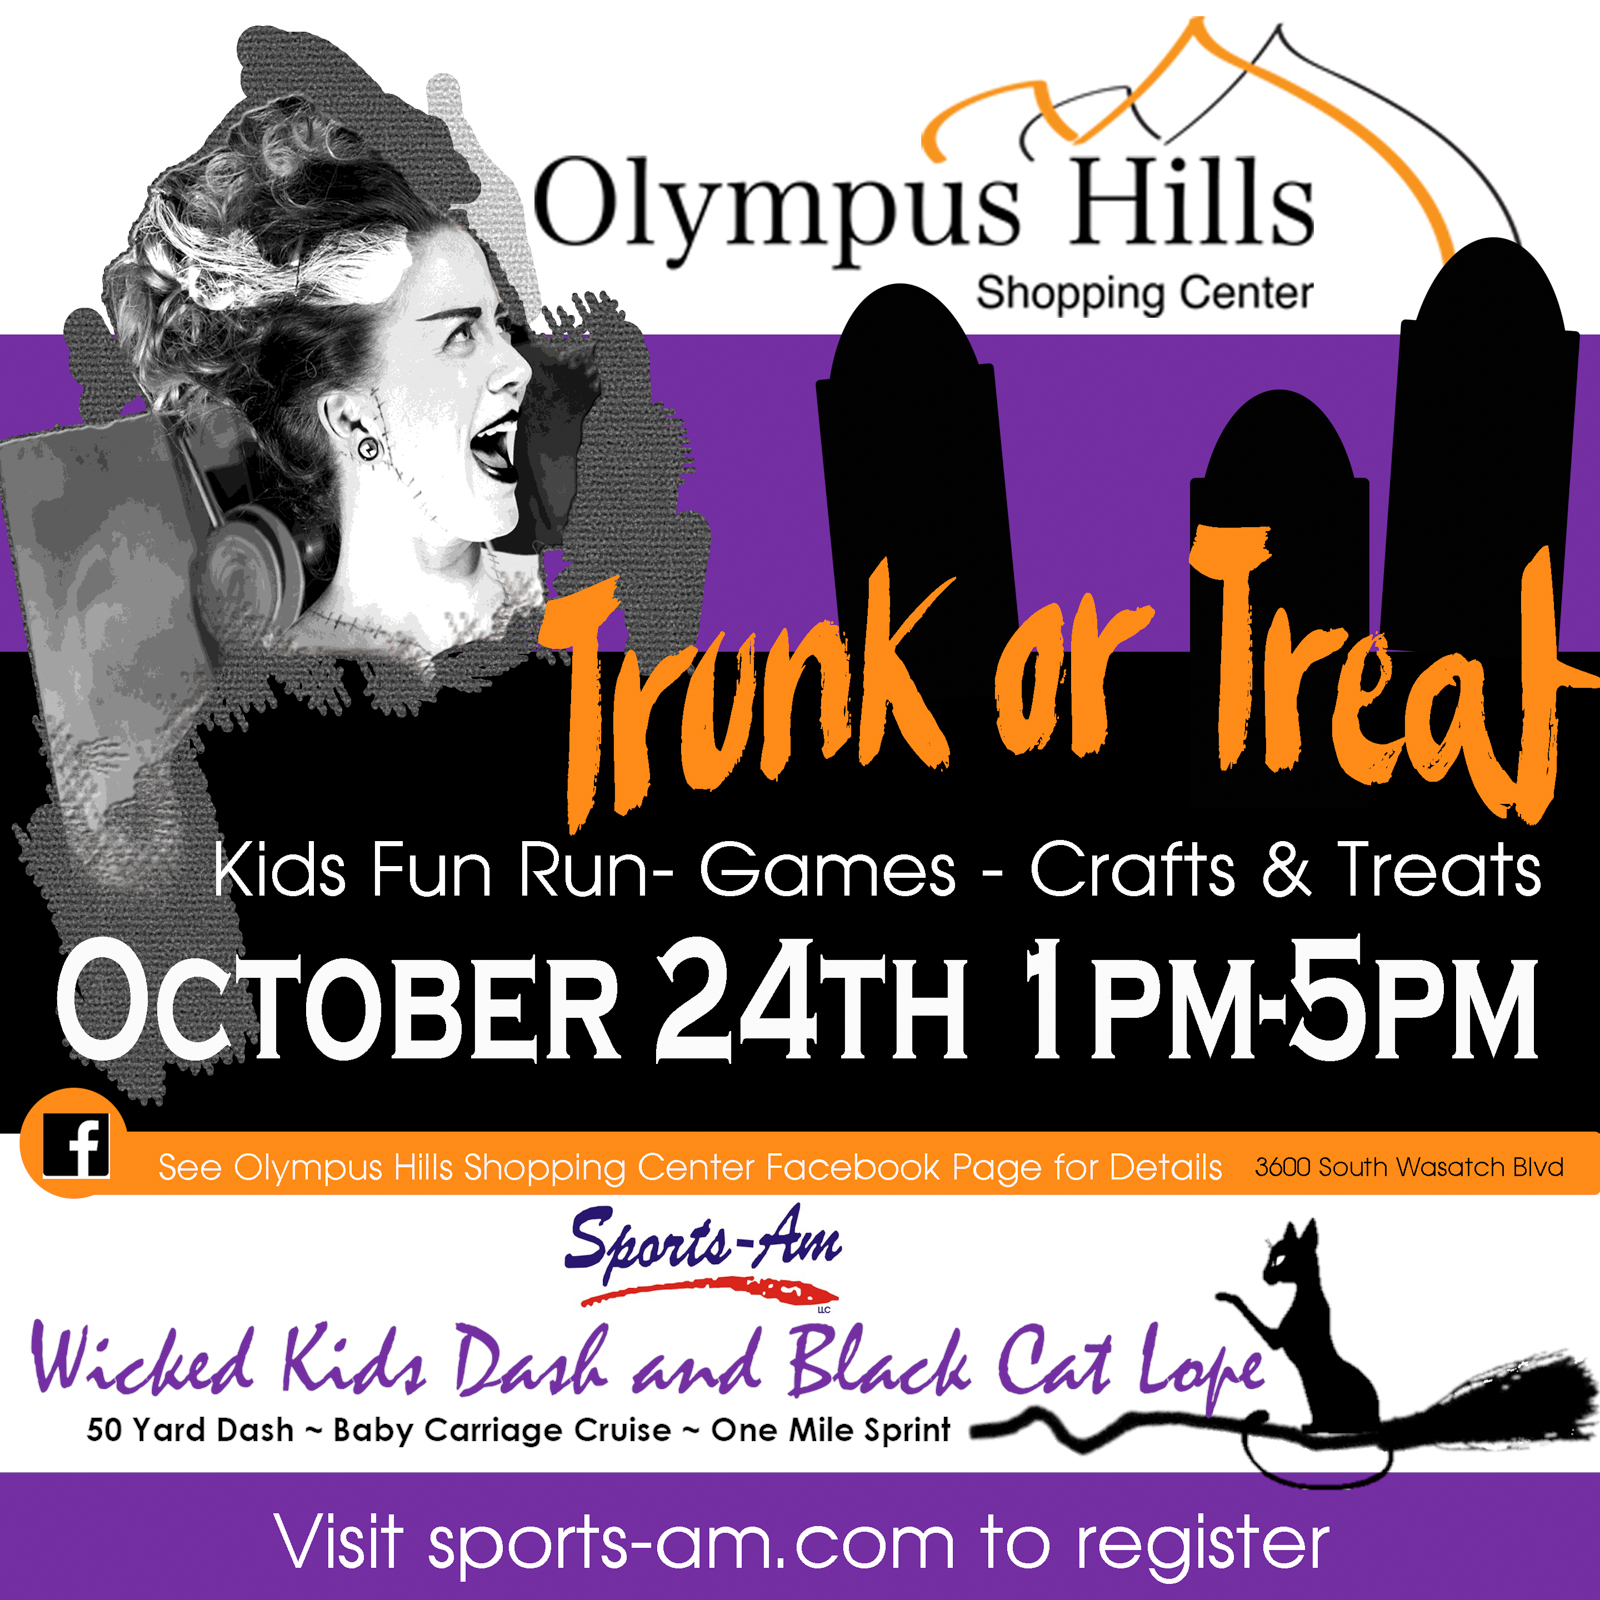 Olympus Hills Shopping Center Trunk or Treat